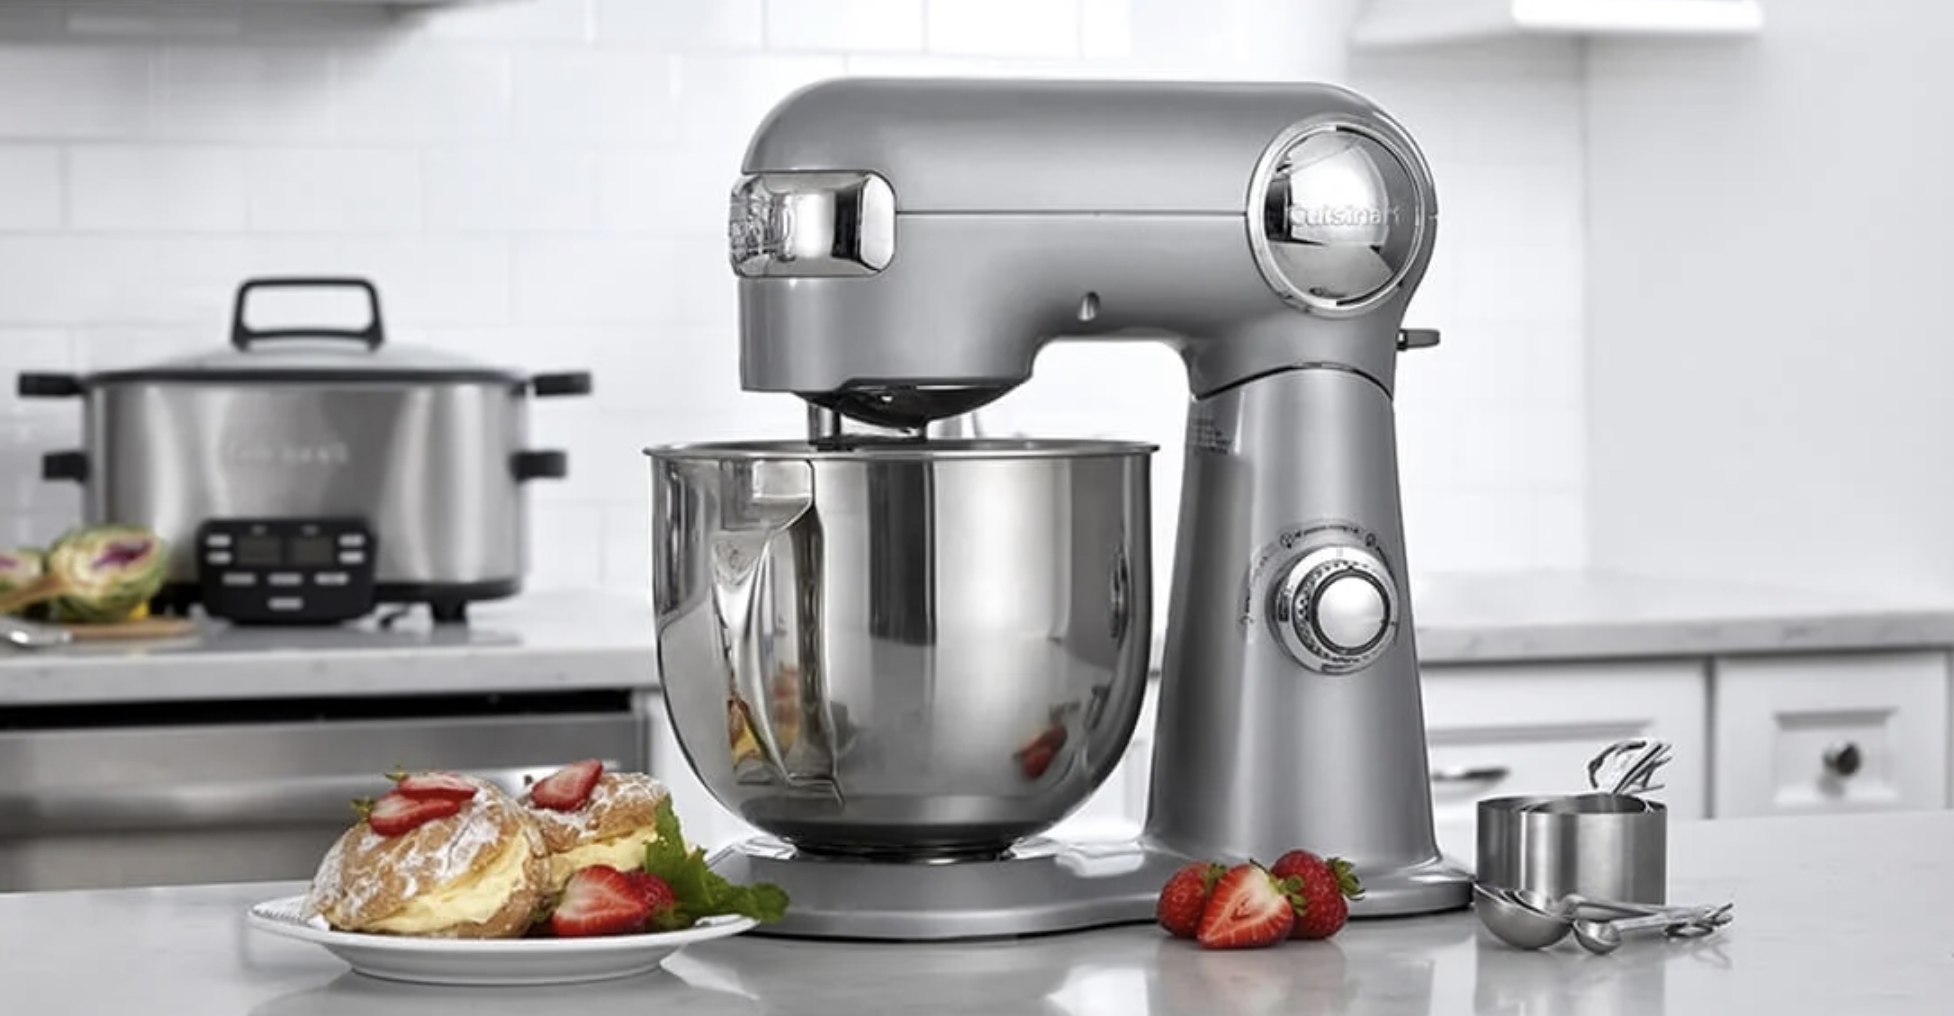 Cuisinart vs. KitchenAid Stand Mixers (12 Key Differences) - Prudent Reviews